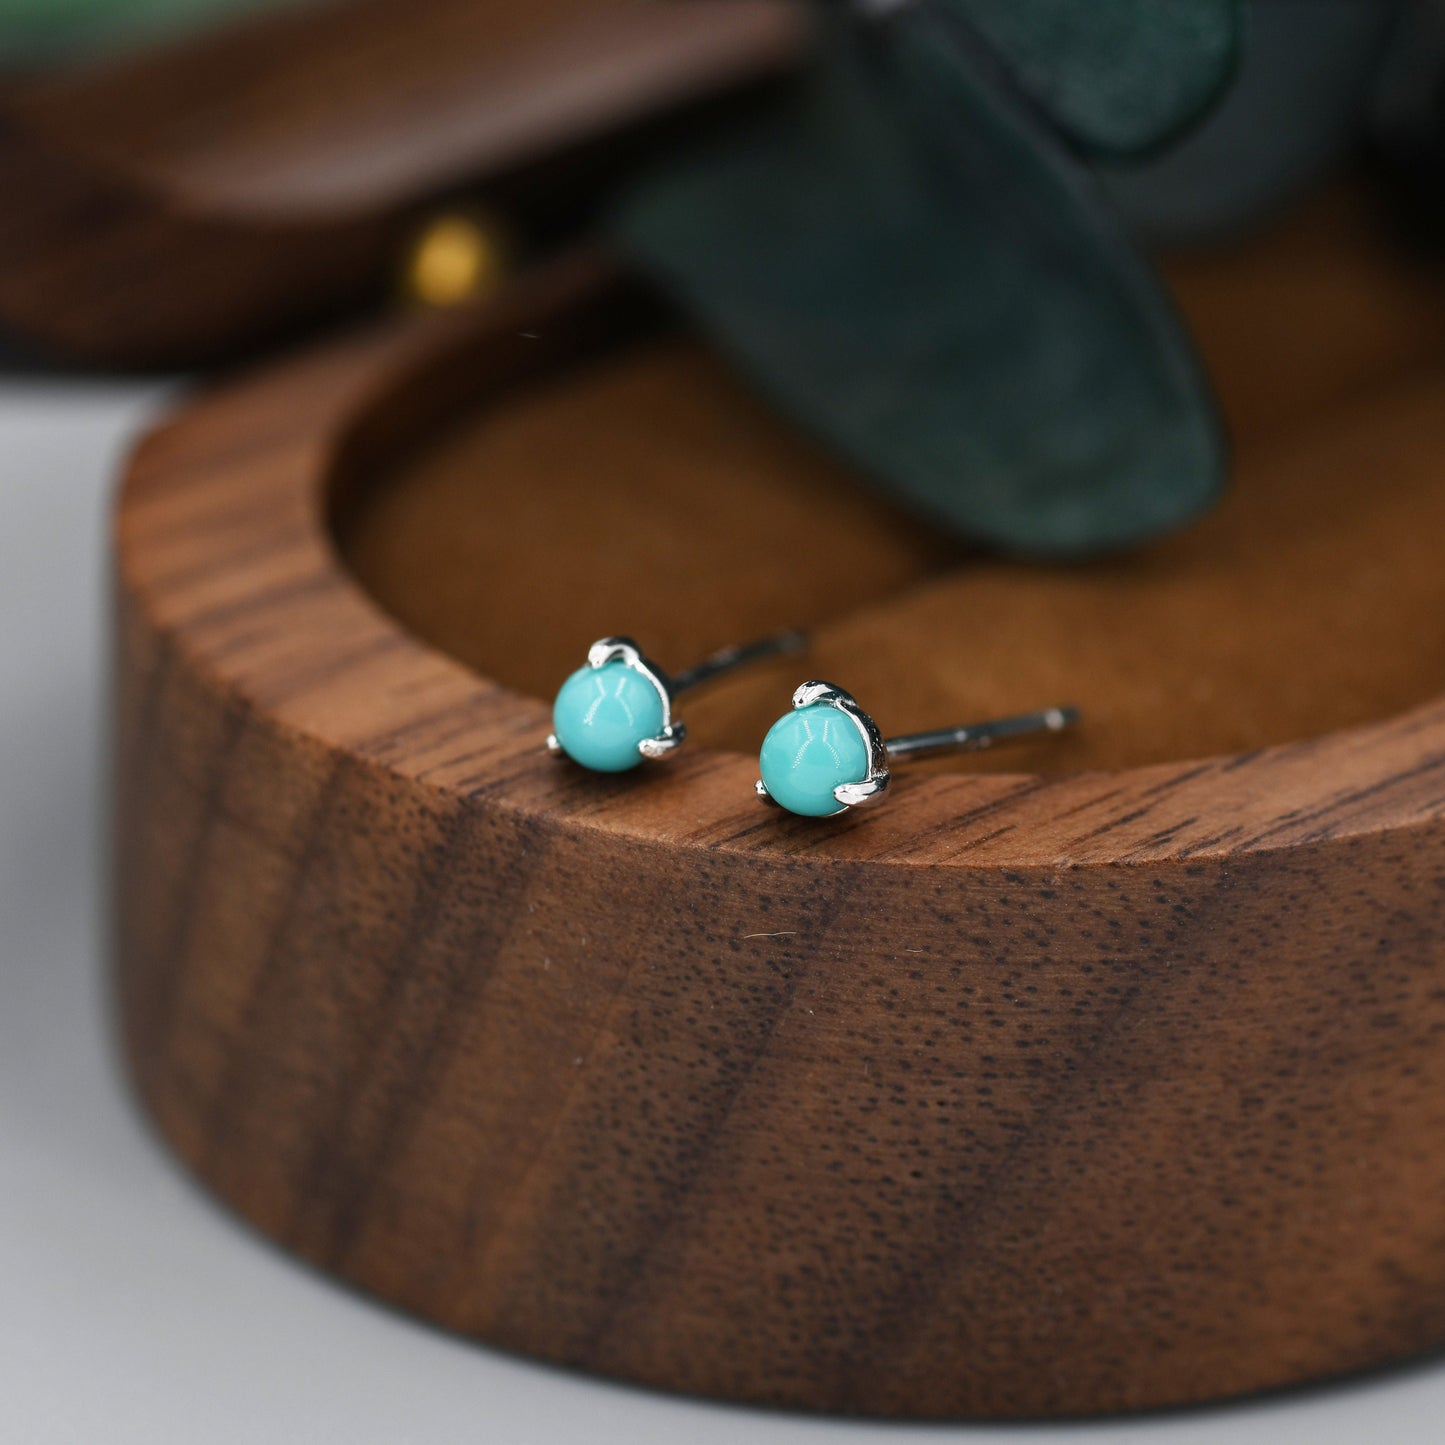 Very Tiny Genuine Turquoise Stone Stud Earrings in Sterling Silver, 3mm Turquoise Stud, Blue Turquoise Earrings, December Birthstone